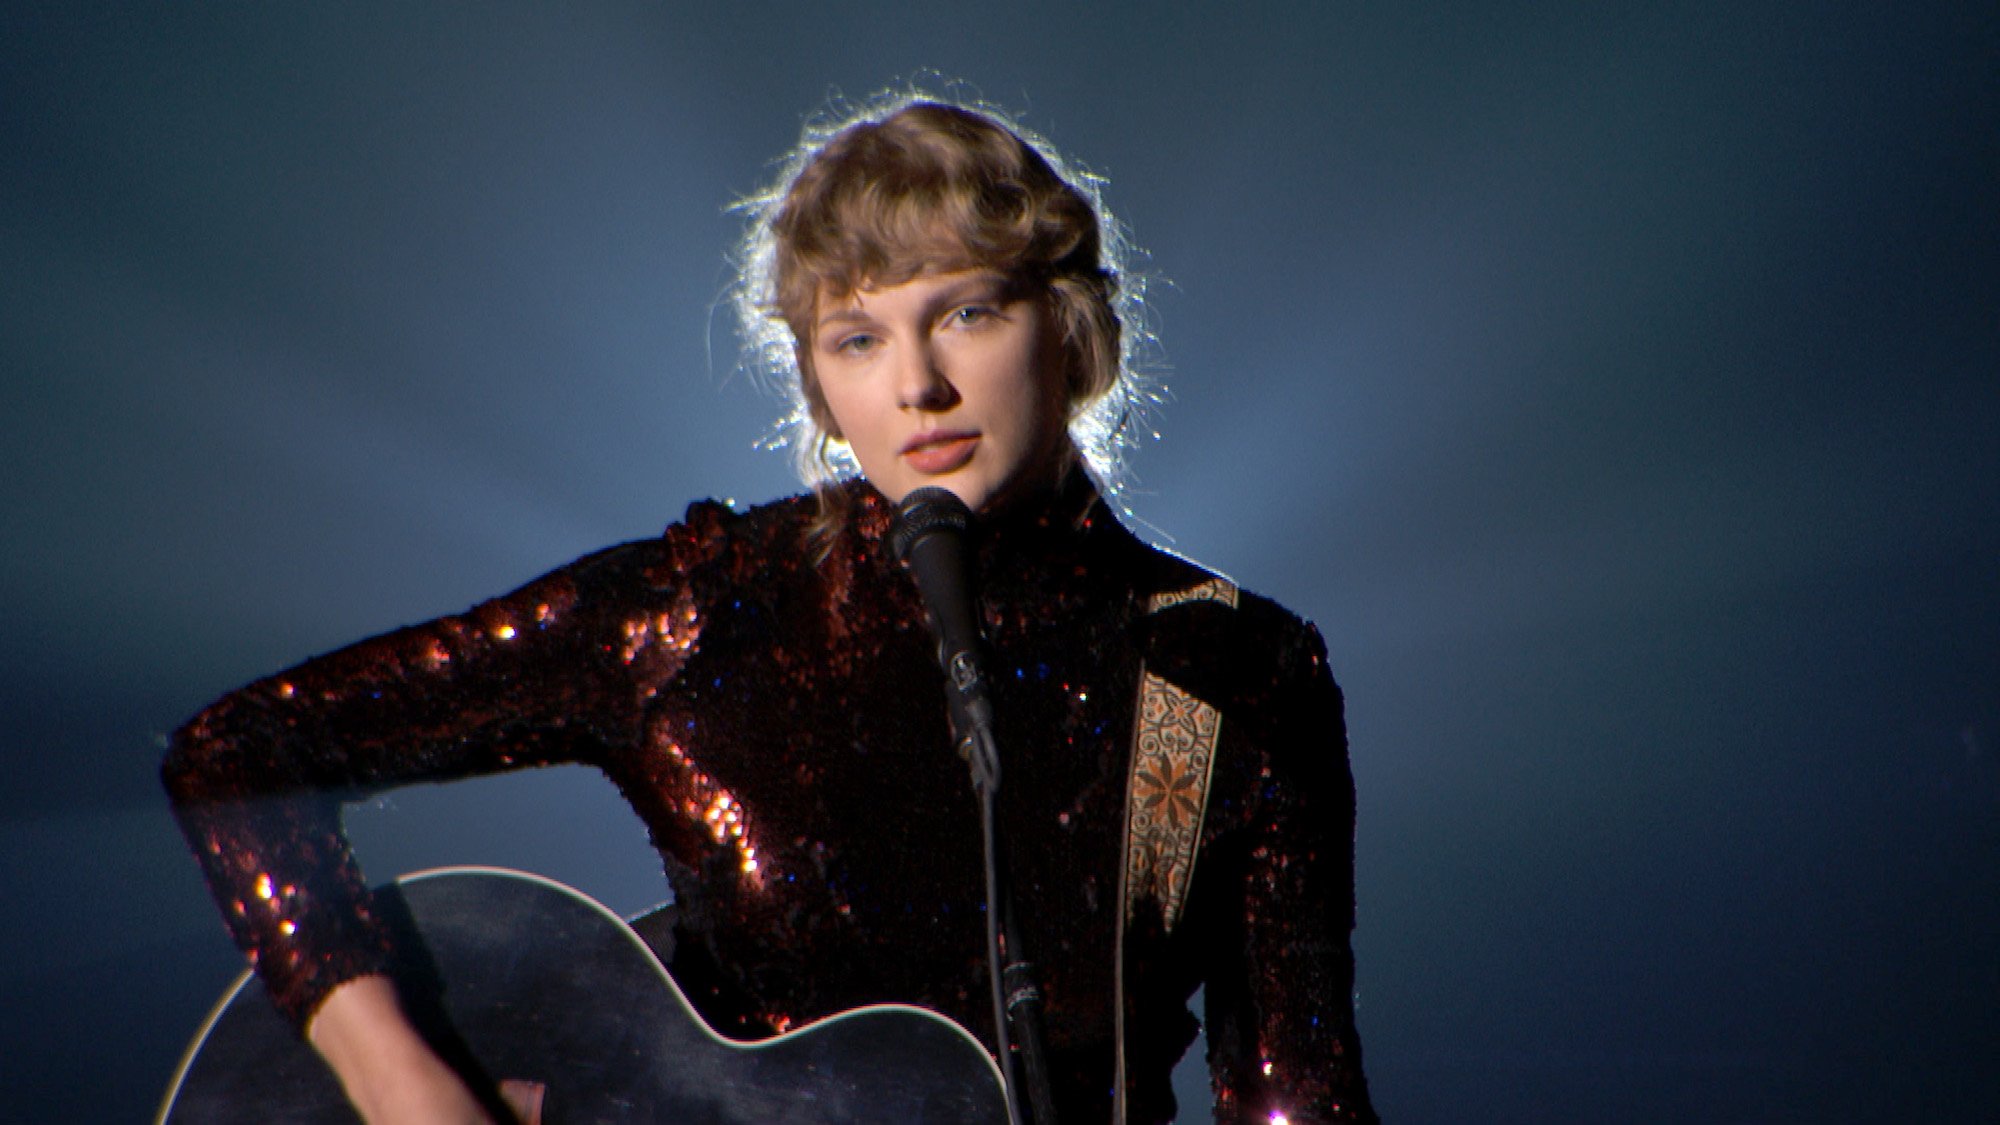 Taylor Swift performing at the 55th Academy of Country Music Awards on Sept. 16, 2020.